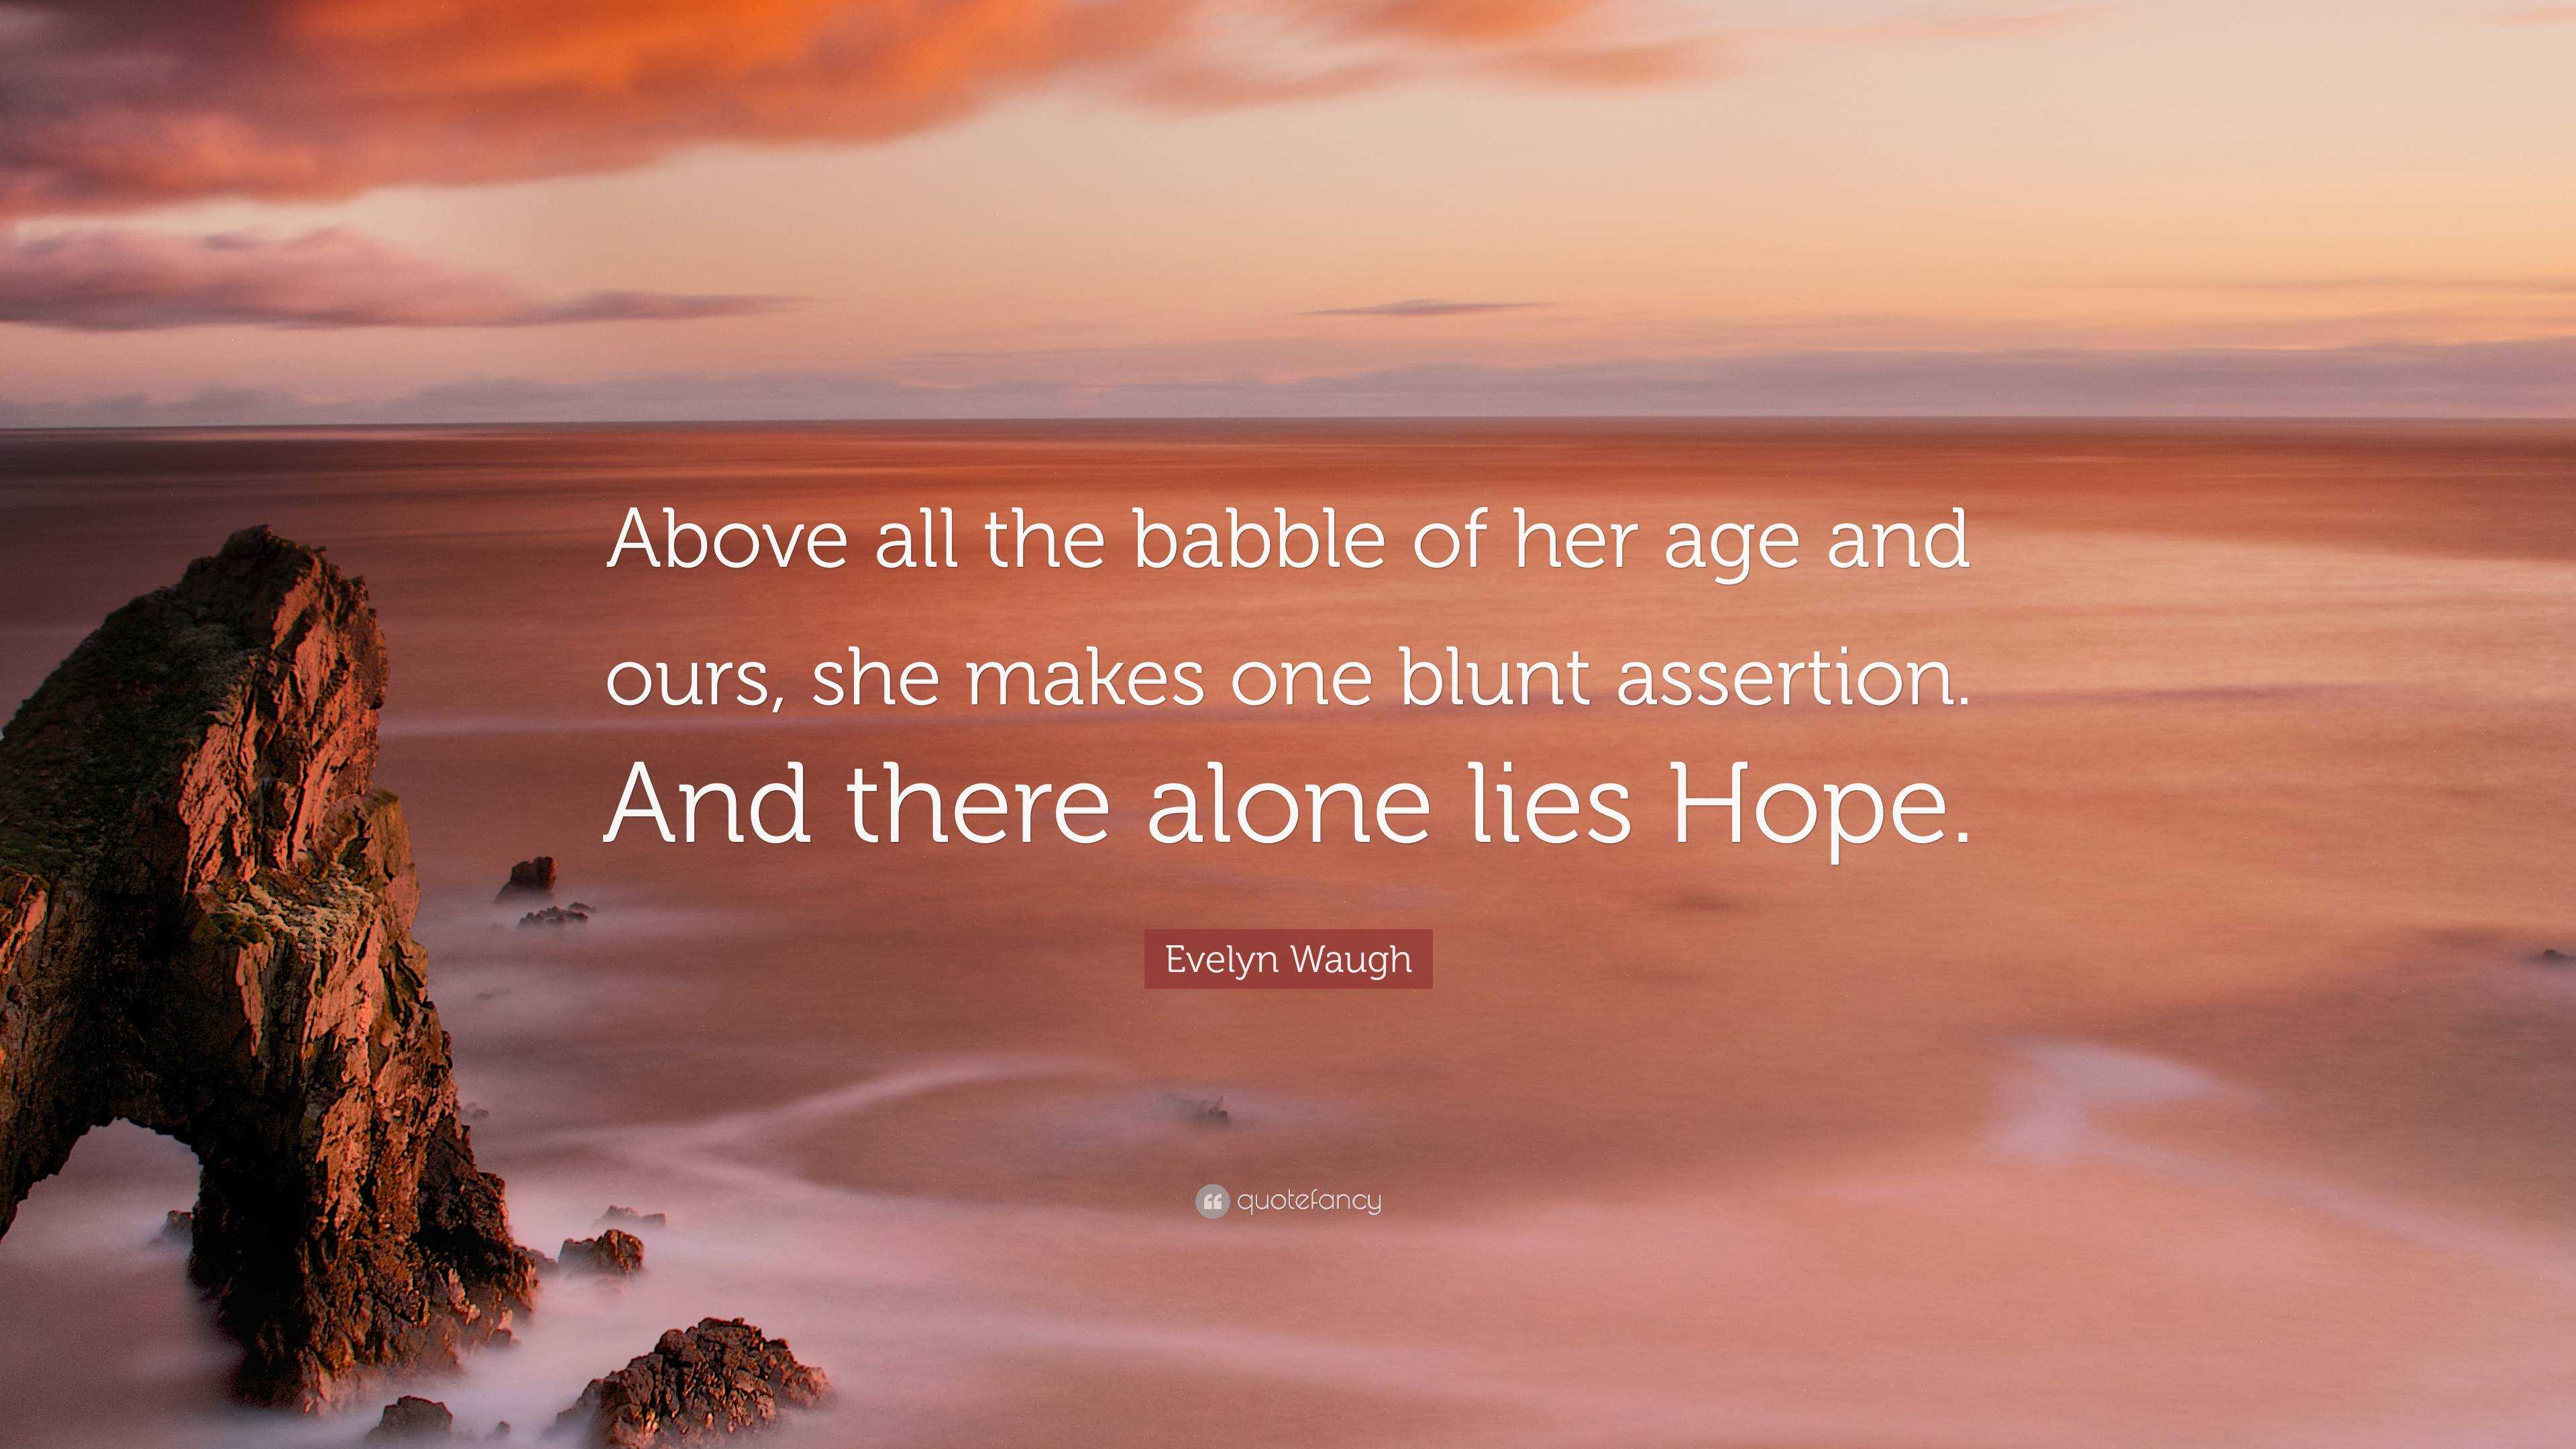 Evelyn Waugh Quote: “Above all the babble of her age and ours, she makes one  blunt